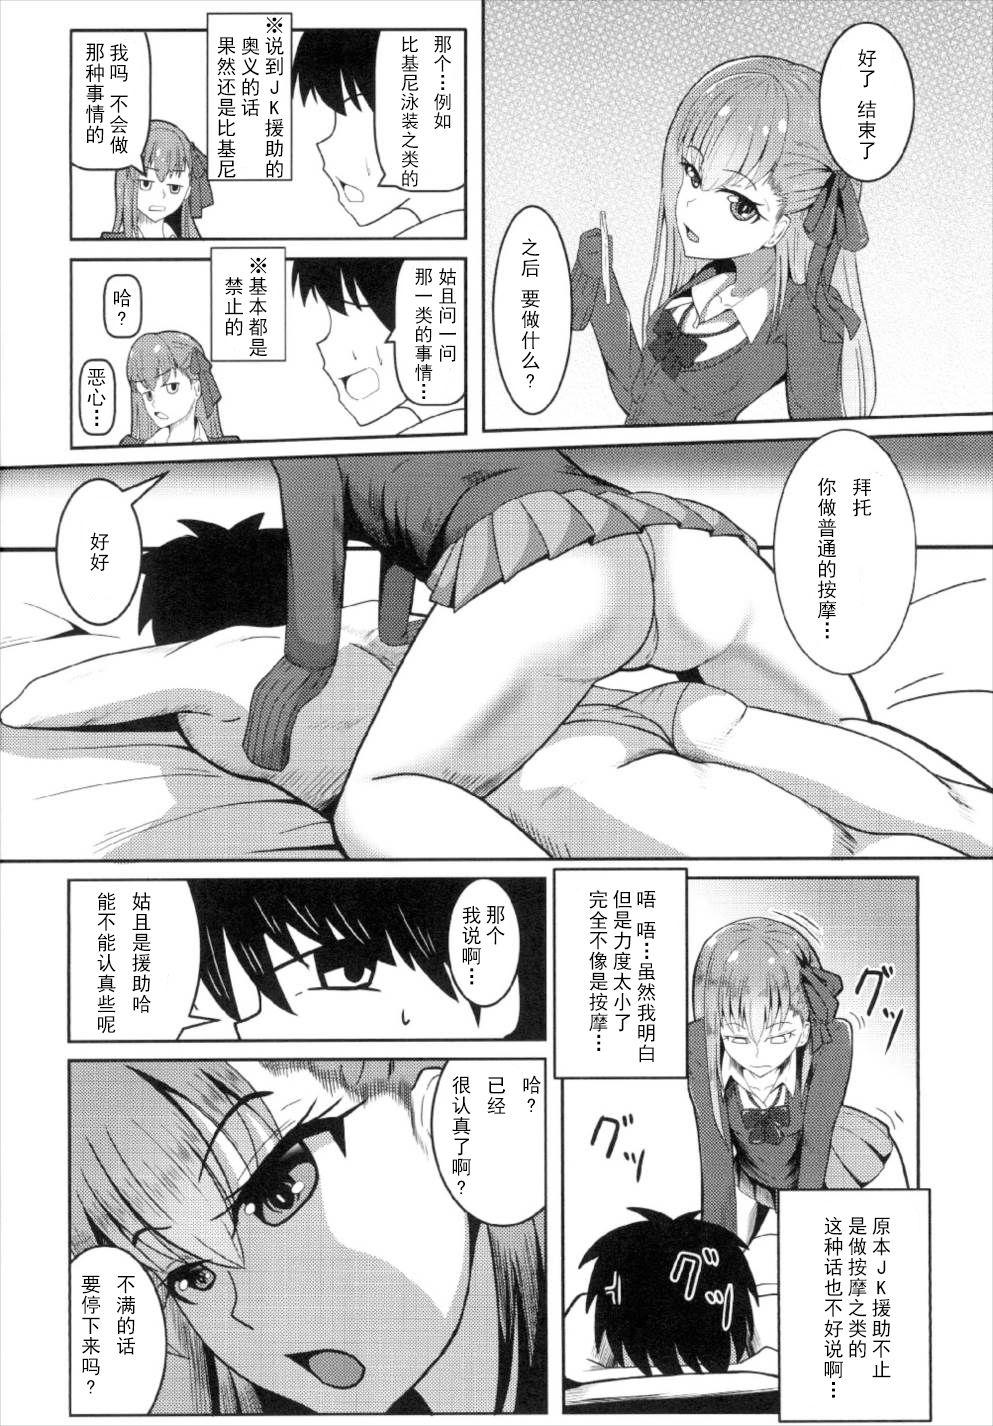 Longhair Chaldea JK Collection Vol. 2 Meltlilith - Fate grand order Cachonda - Page 5